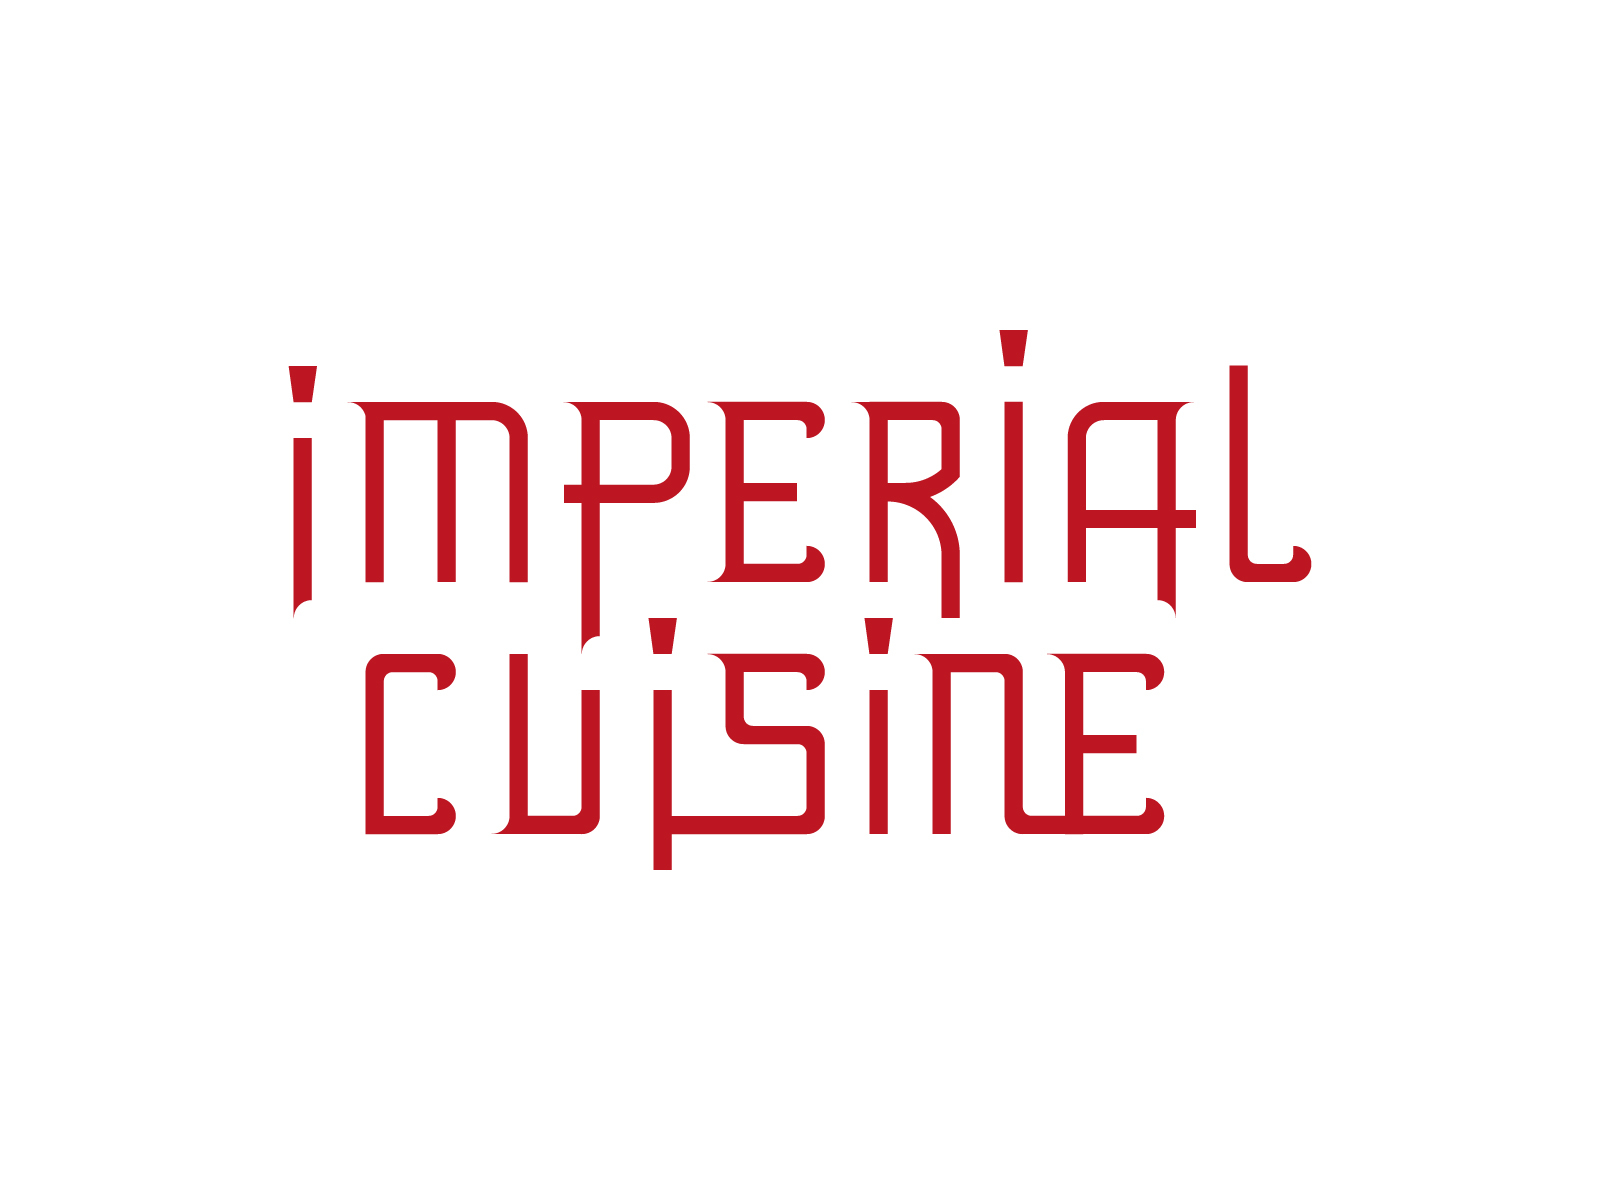 Imperial Cuisine - Chinese restaurant logo by Hao Ta on Dribbble